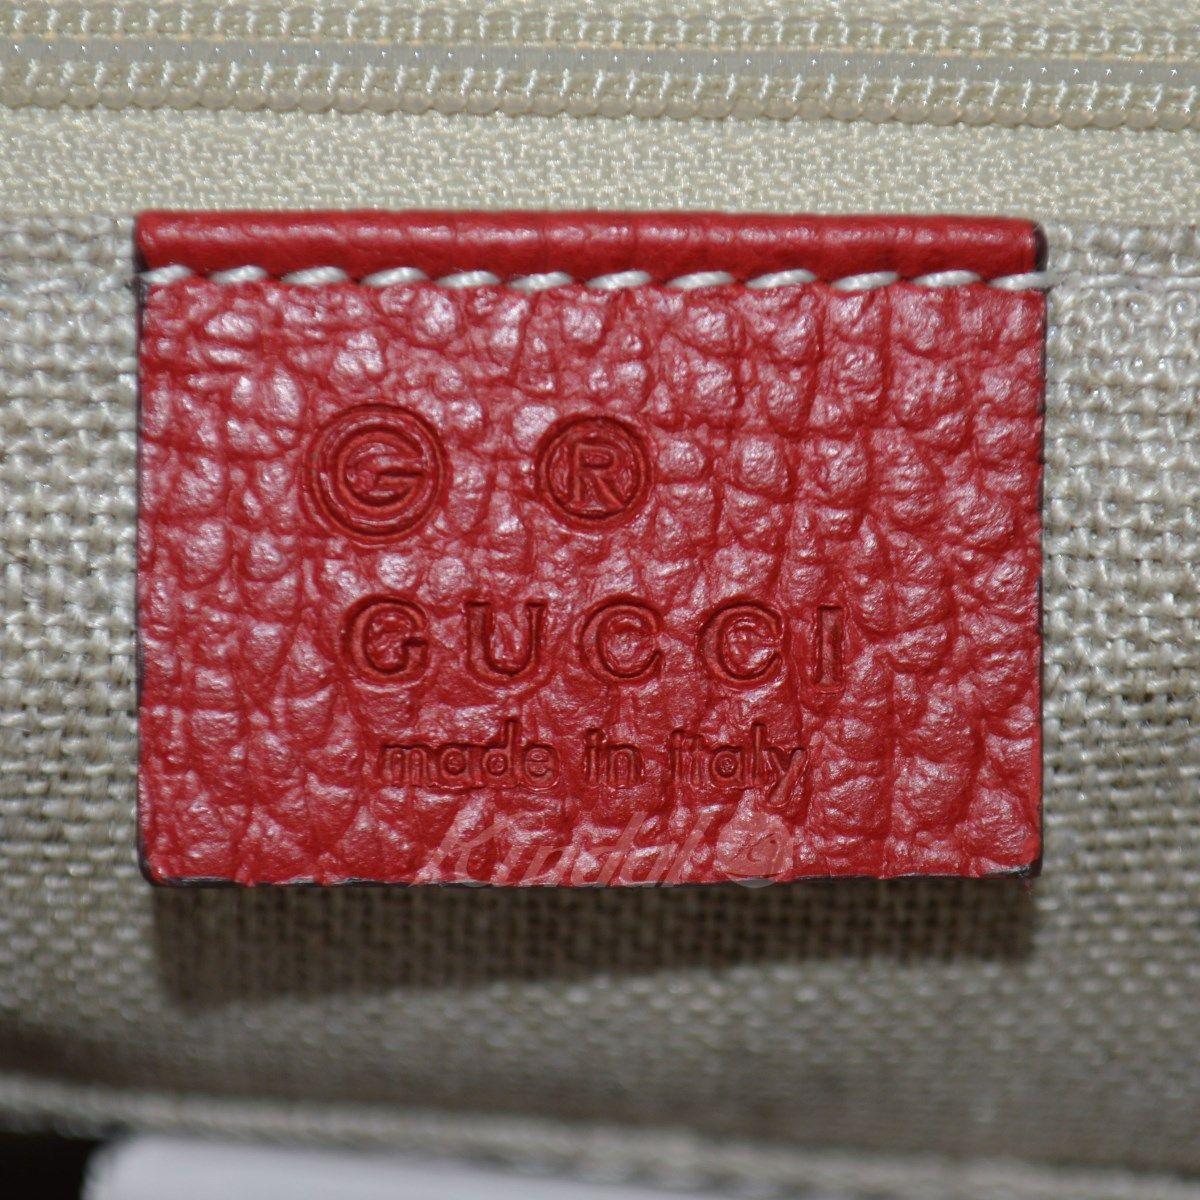 Red Gucci Logo - kindal: Leather shoulder bag 449711 red (Gucci) with the GUCCI logo ...